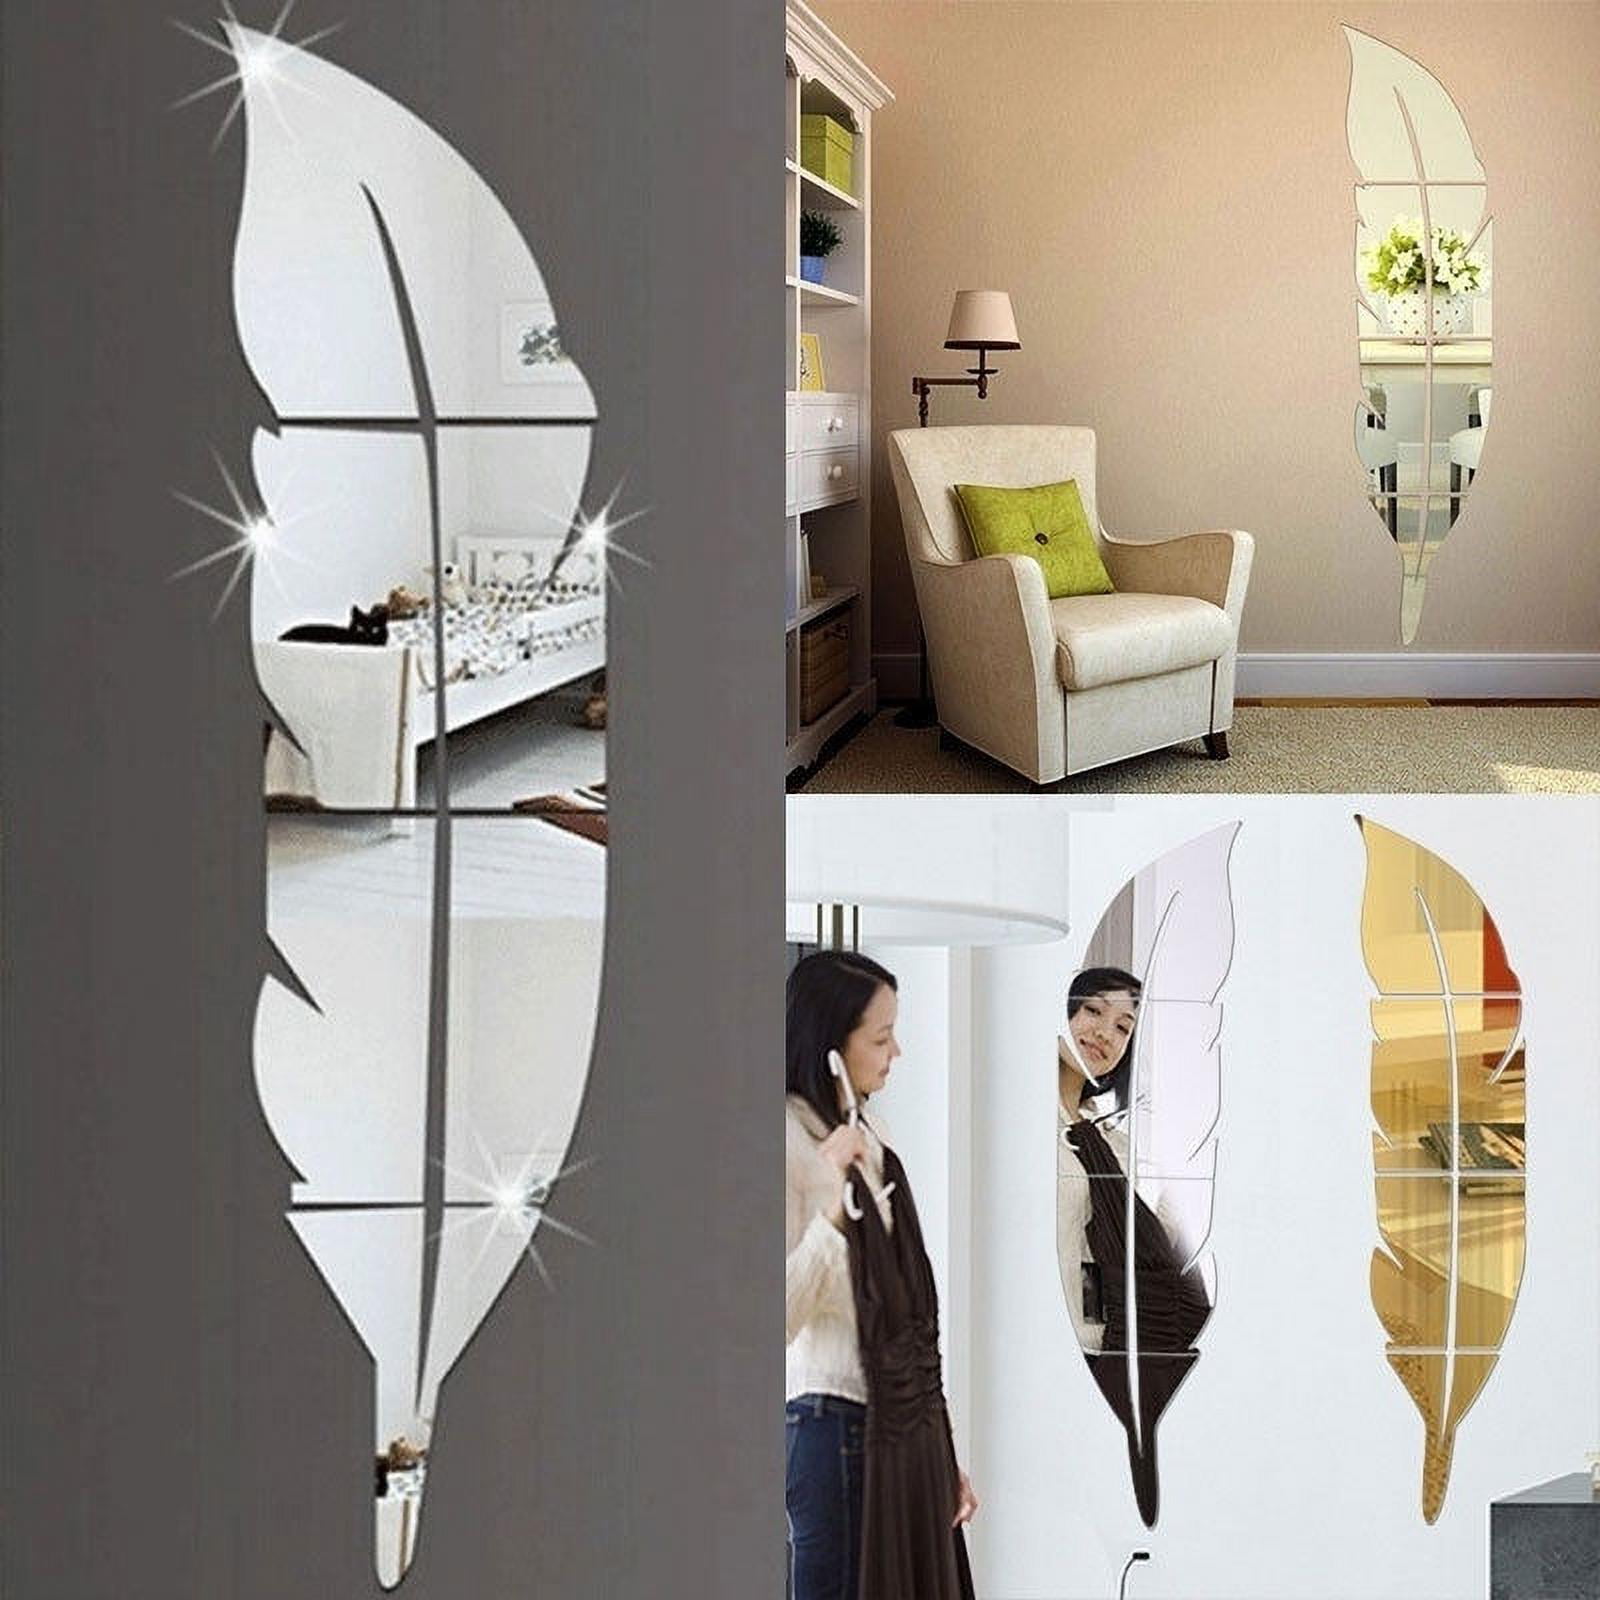 Details about   3D DIY Removable Feather Mirror Home Room Decal Vinyl Art Stickers Wall Decor 